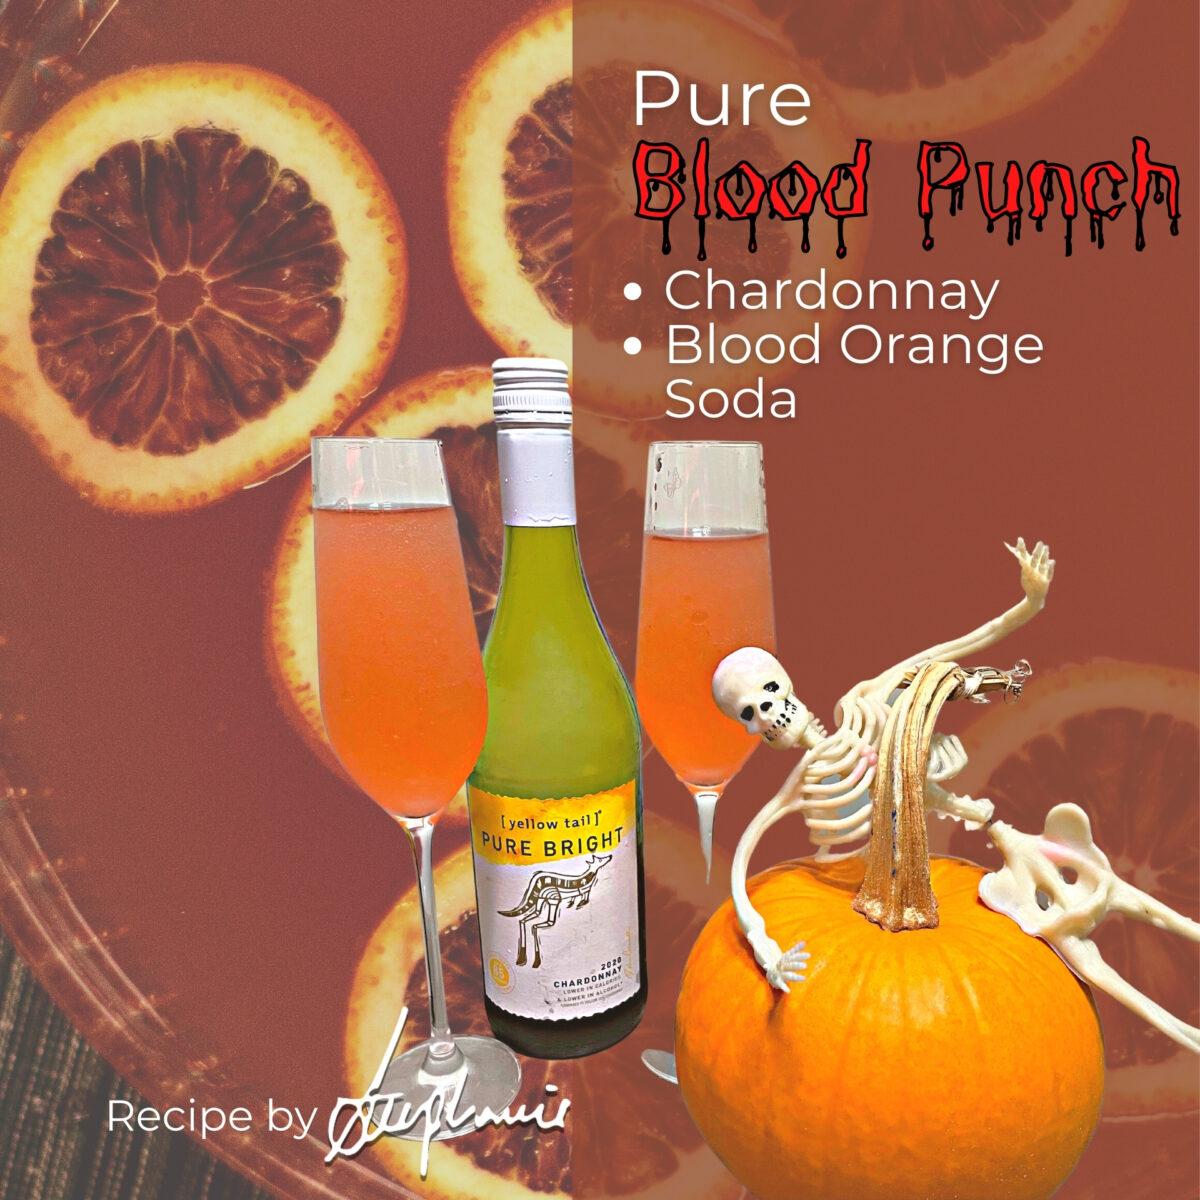 Pure Blood Punch Halloween Drink Recipe - [yellow tail] chardonnay pure bright low calorie